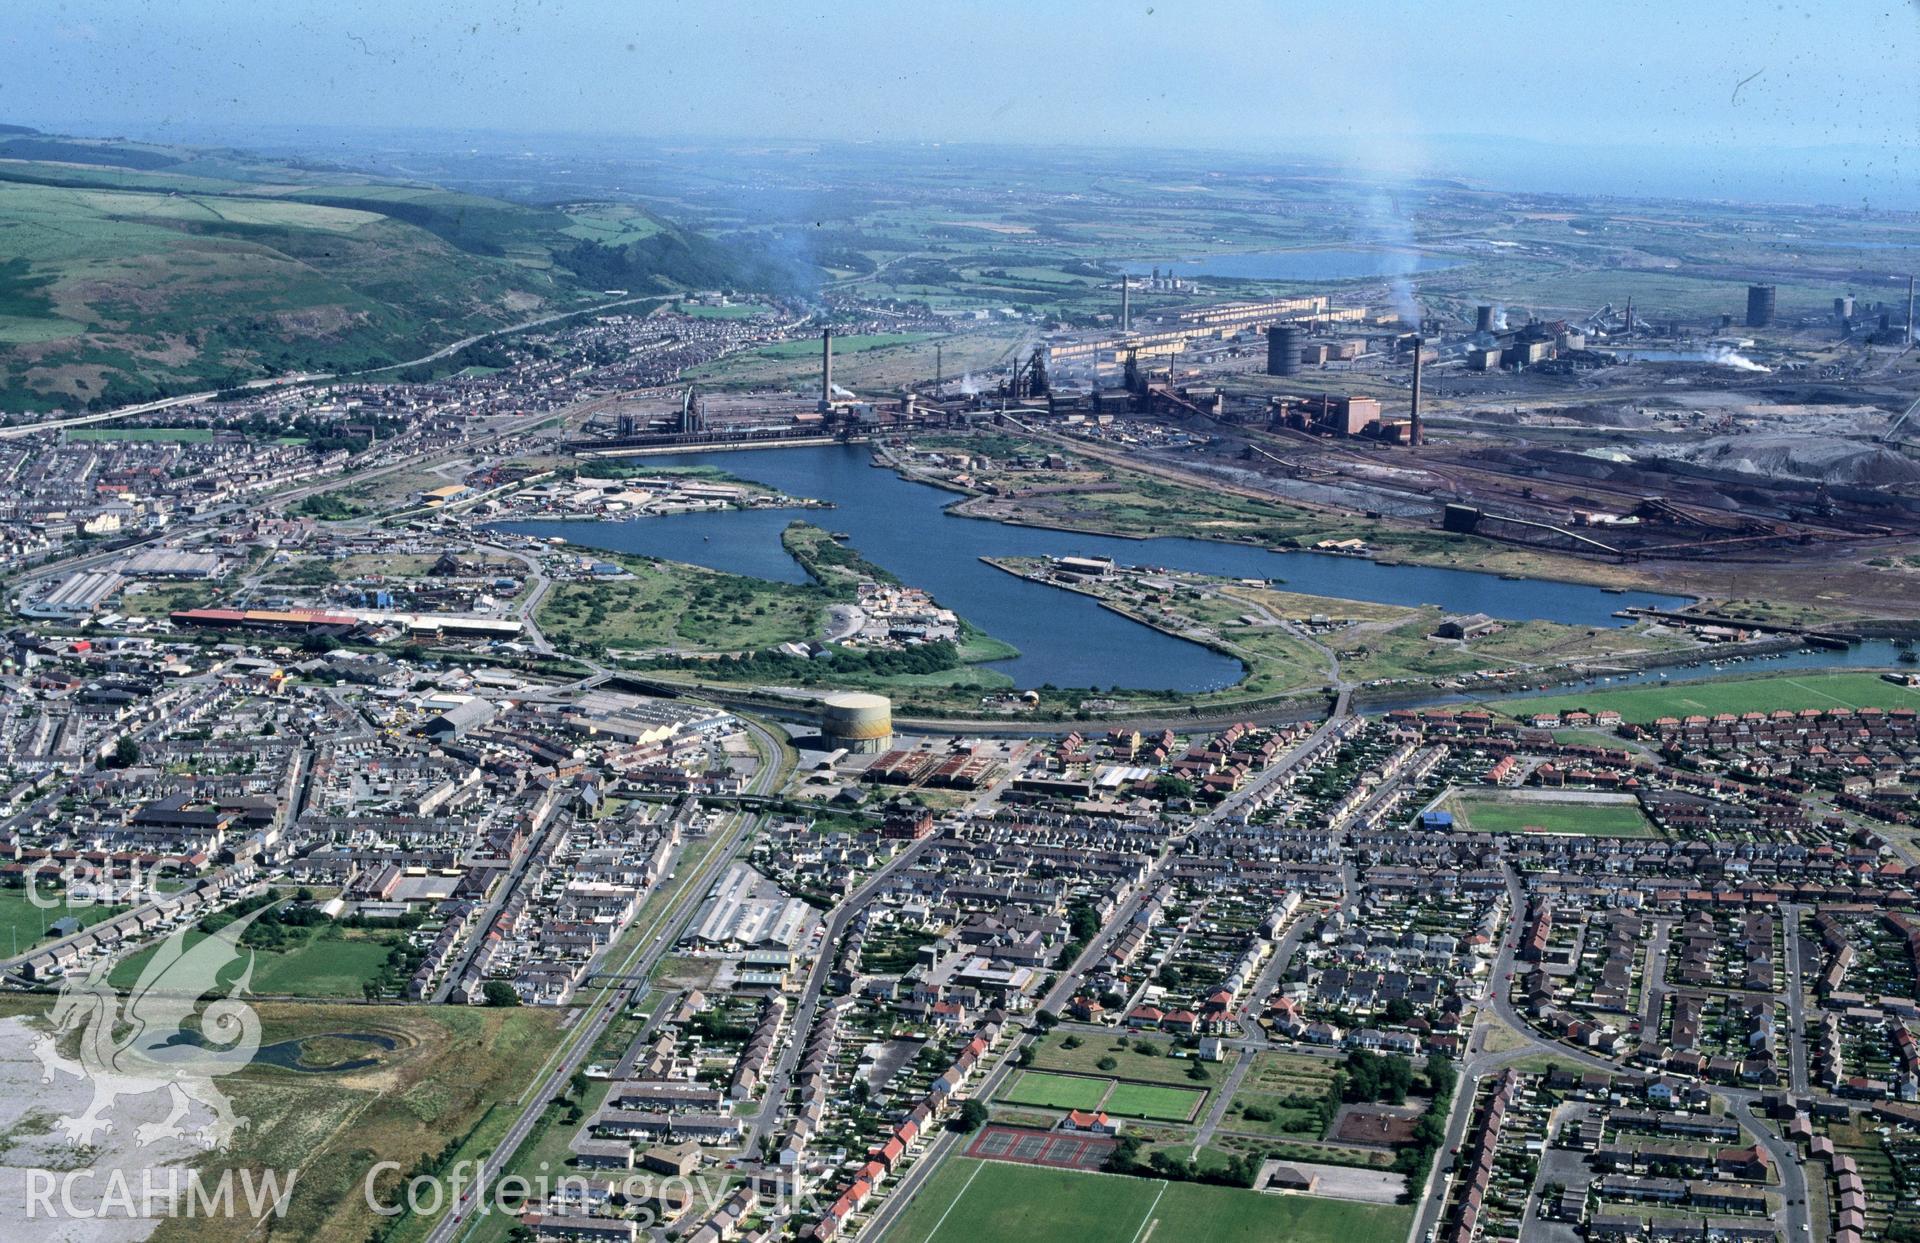 RCAHMW colour oblique aerial photograph of Port Talbot Docks taken on 20/07/1995 by C.R. Musson